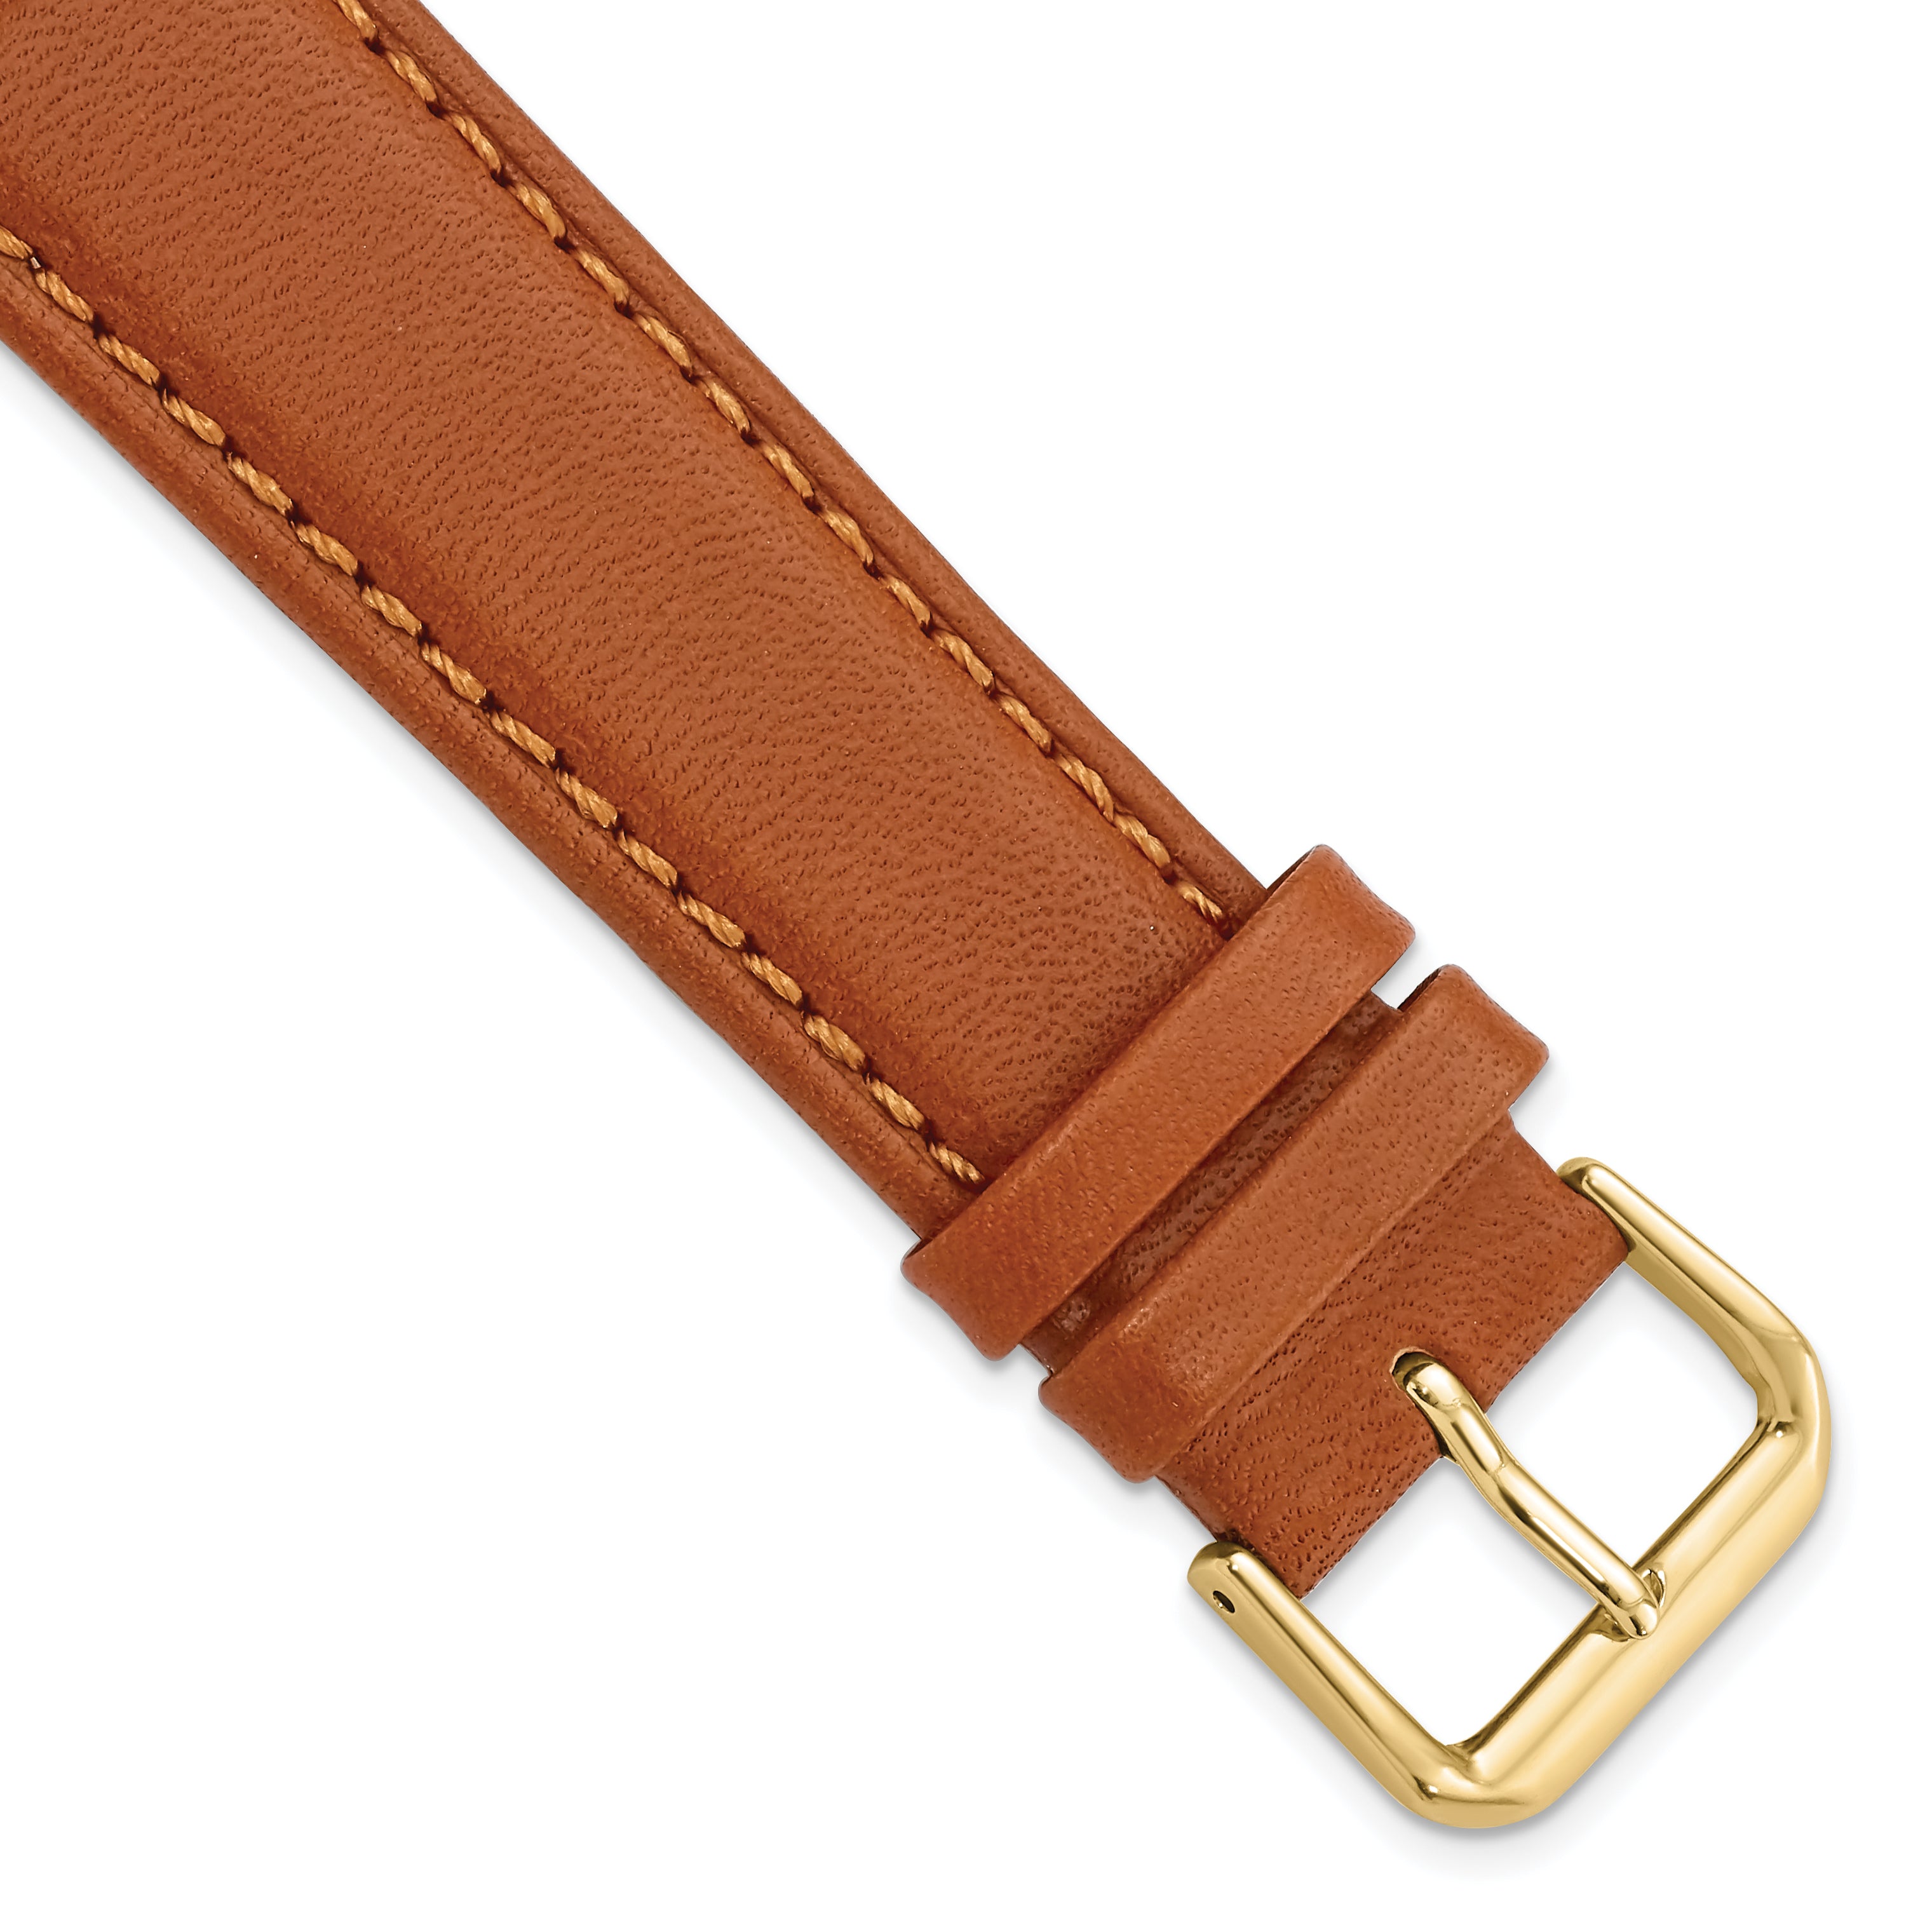 DeBeer 20mm Havana Italian Leather with Gold-tone Buckle 7.5 inch Watch Band